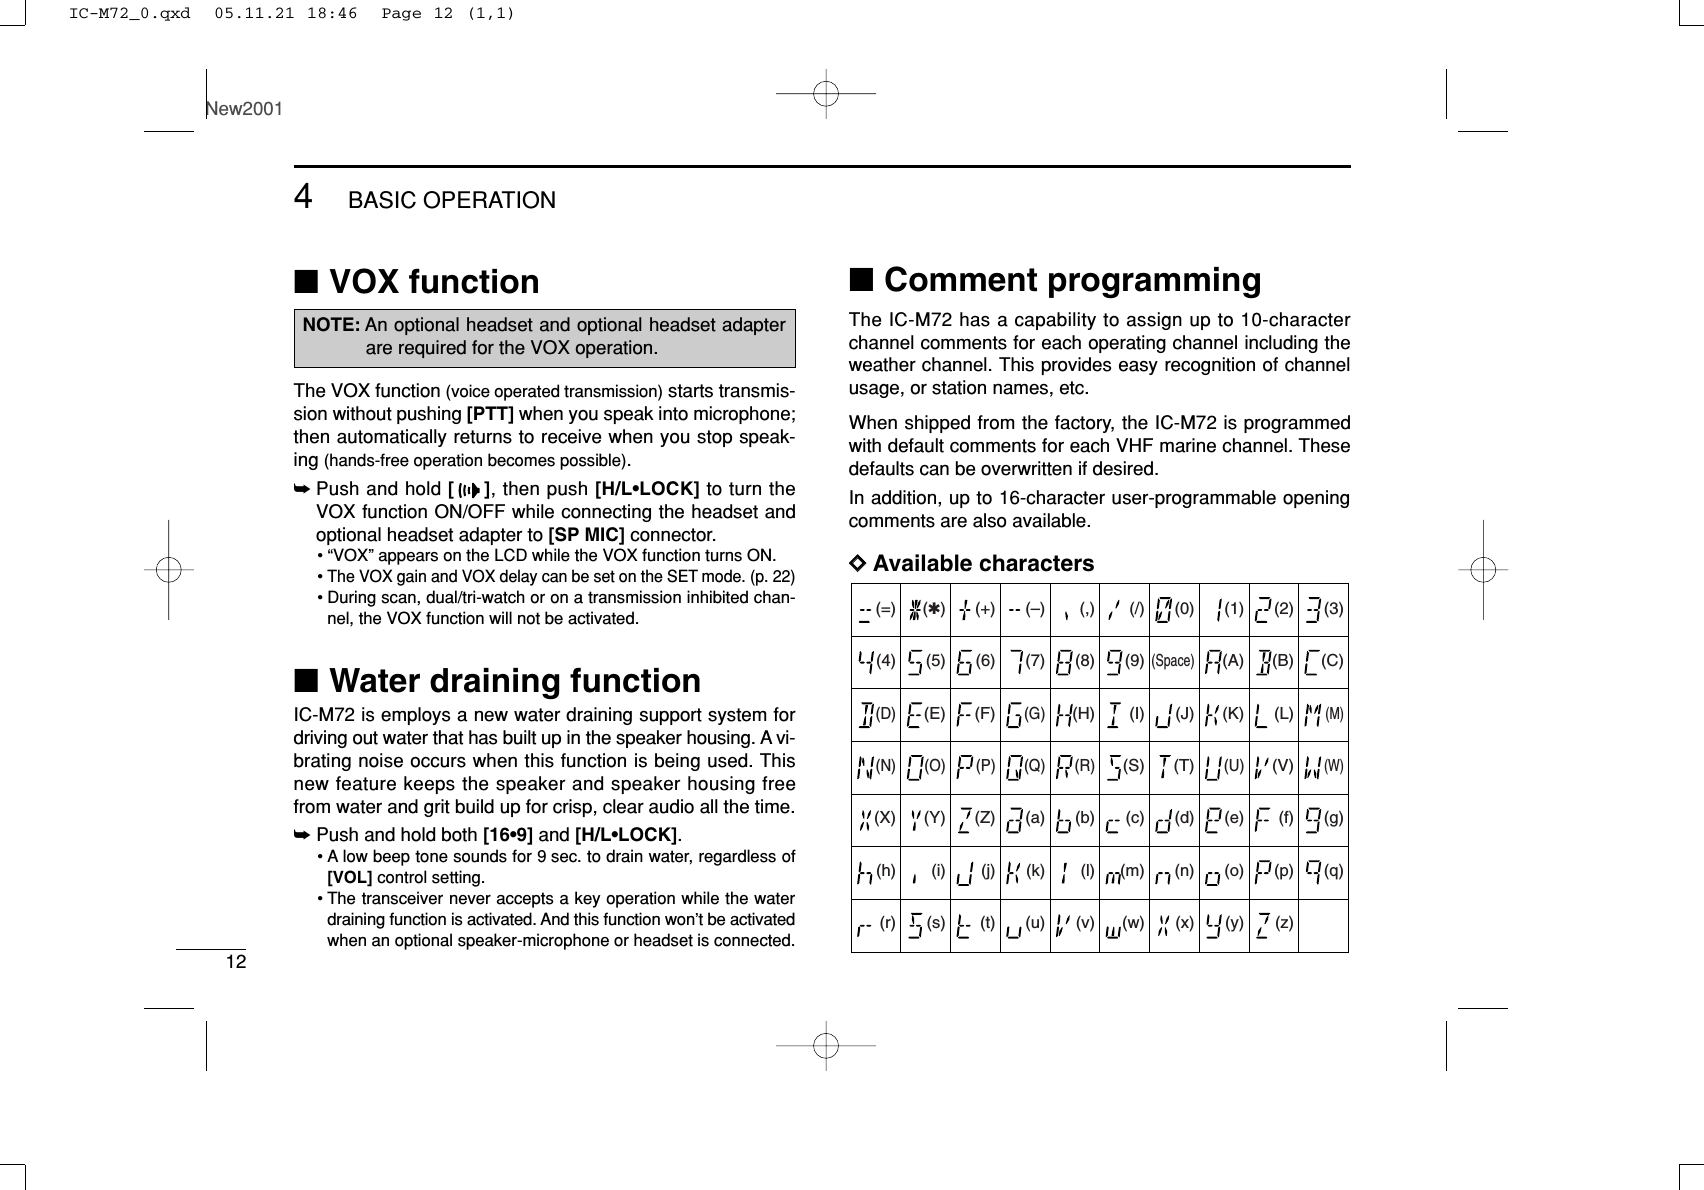 124BASIC OPERATIONNew2001■VOX functionThe VOX function (voice operated transmission) starts transmis-sion without pushing [PTT] when you speak into microphone;then automatically returns to receive when you stop speak-ing (hands-free operation becomes possible).➥Push and hold [], then push [H/L•LOCK] to turn theVOX function ON/OFF while connecting the headset andoptional headset adapter to [SP MIC] connector.• “VOX” appears on the LCD while the VOX function turns ON.• The VOX gain and VOX delay can be set on the SET mode. (p. 22)•During scan, dual/tri-watch or on a transmission inhibited chan-nel, the VOX function will not be activated.■Water draining functionIC-M72 is employs a new water draining support system fordriving out water that has built up in the speaker housing. A vi-brating noise occurs when this function is being used. Thisnew feature keeps the speaker and speaker housing freefrom water and grit build up for crisp, clear audio all the time.➥Push and hold both [16•9] and [H/L•LOCK].•A low beep tone sounds for 9 sec. to drain water, regardless of[VOL] control setting.•The transceiver never accepts a key operation while the waterdraining function is activated. And this function won’t be activatedwhen an optional speaker-microphone or headset is connected. ■Comment programmingThe IC-M72 has a capability to assign up to 10-characterchannel comments for each operating channel including theweather channel. This provides easy recognition of channelusage, or station names, etc.When shipped from the factory, the IC-M72 is programmedwith default comments for each VHF marine channel. Thesedefaults can be overwritten if desired.In addition, up to 16-character user-programmable openingcomments are also available. DDAvailable characters(=)(4)(D)(N)(X)(h)(r)(✱)(5)(E)(O)(Y)(i)(s)(+)(6)(F)(P)(Z)(j)(t)(7)(G)(Q)(a)(k)(u)(,)(8)(H)(R)(b)(l)(v)(/)(9)(I)(S)(c)(m)(w)(0)(Space)(J)(T)(d)(n)(x)(1)(A)(K)(U)(e)(o)(y)(2)(B)(L)(V)(f)(p)(z)(3)(C)(M)(W)(g)(q)(–)NOTE: An optional headset and optional headset adapterare required for the VOX operation.IC-M72_0.qxd  05.11.21 18:46  Page 12 (1,1)